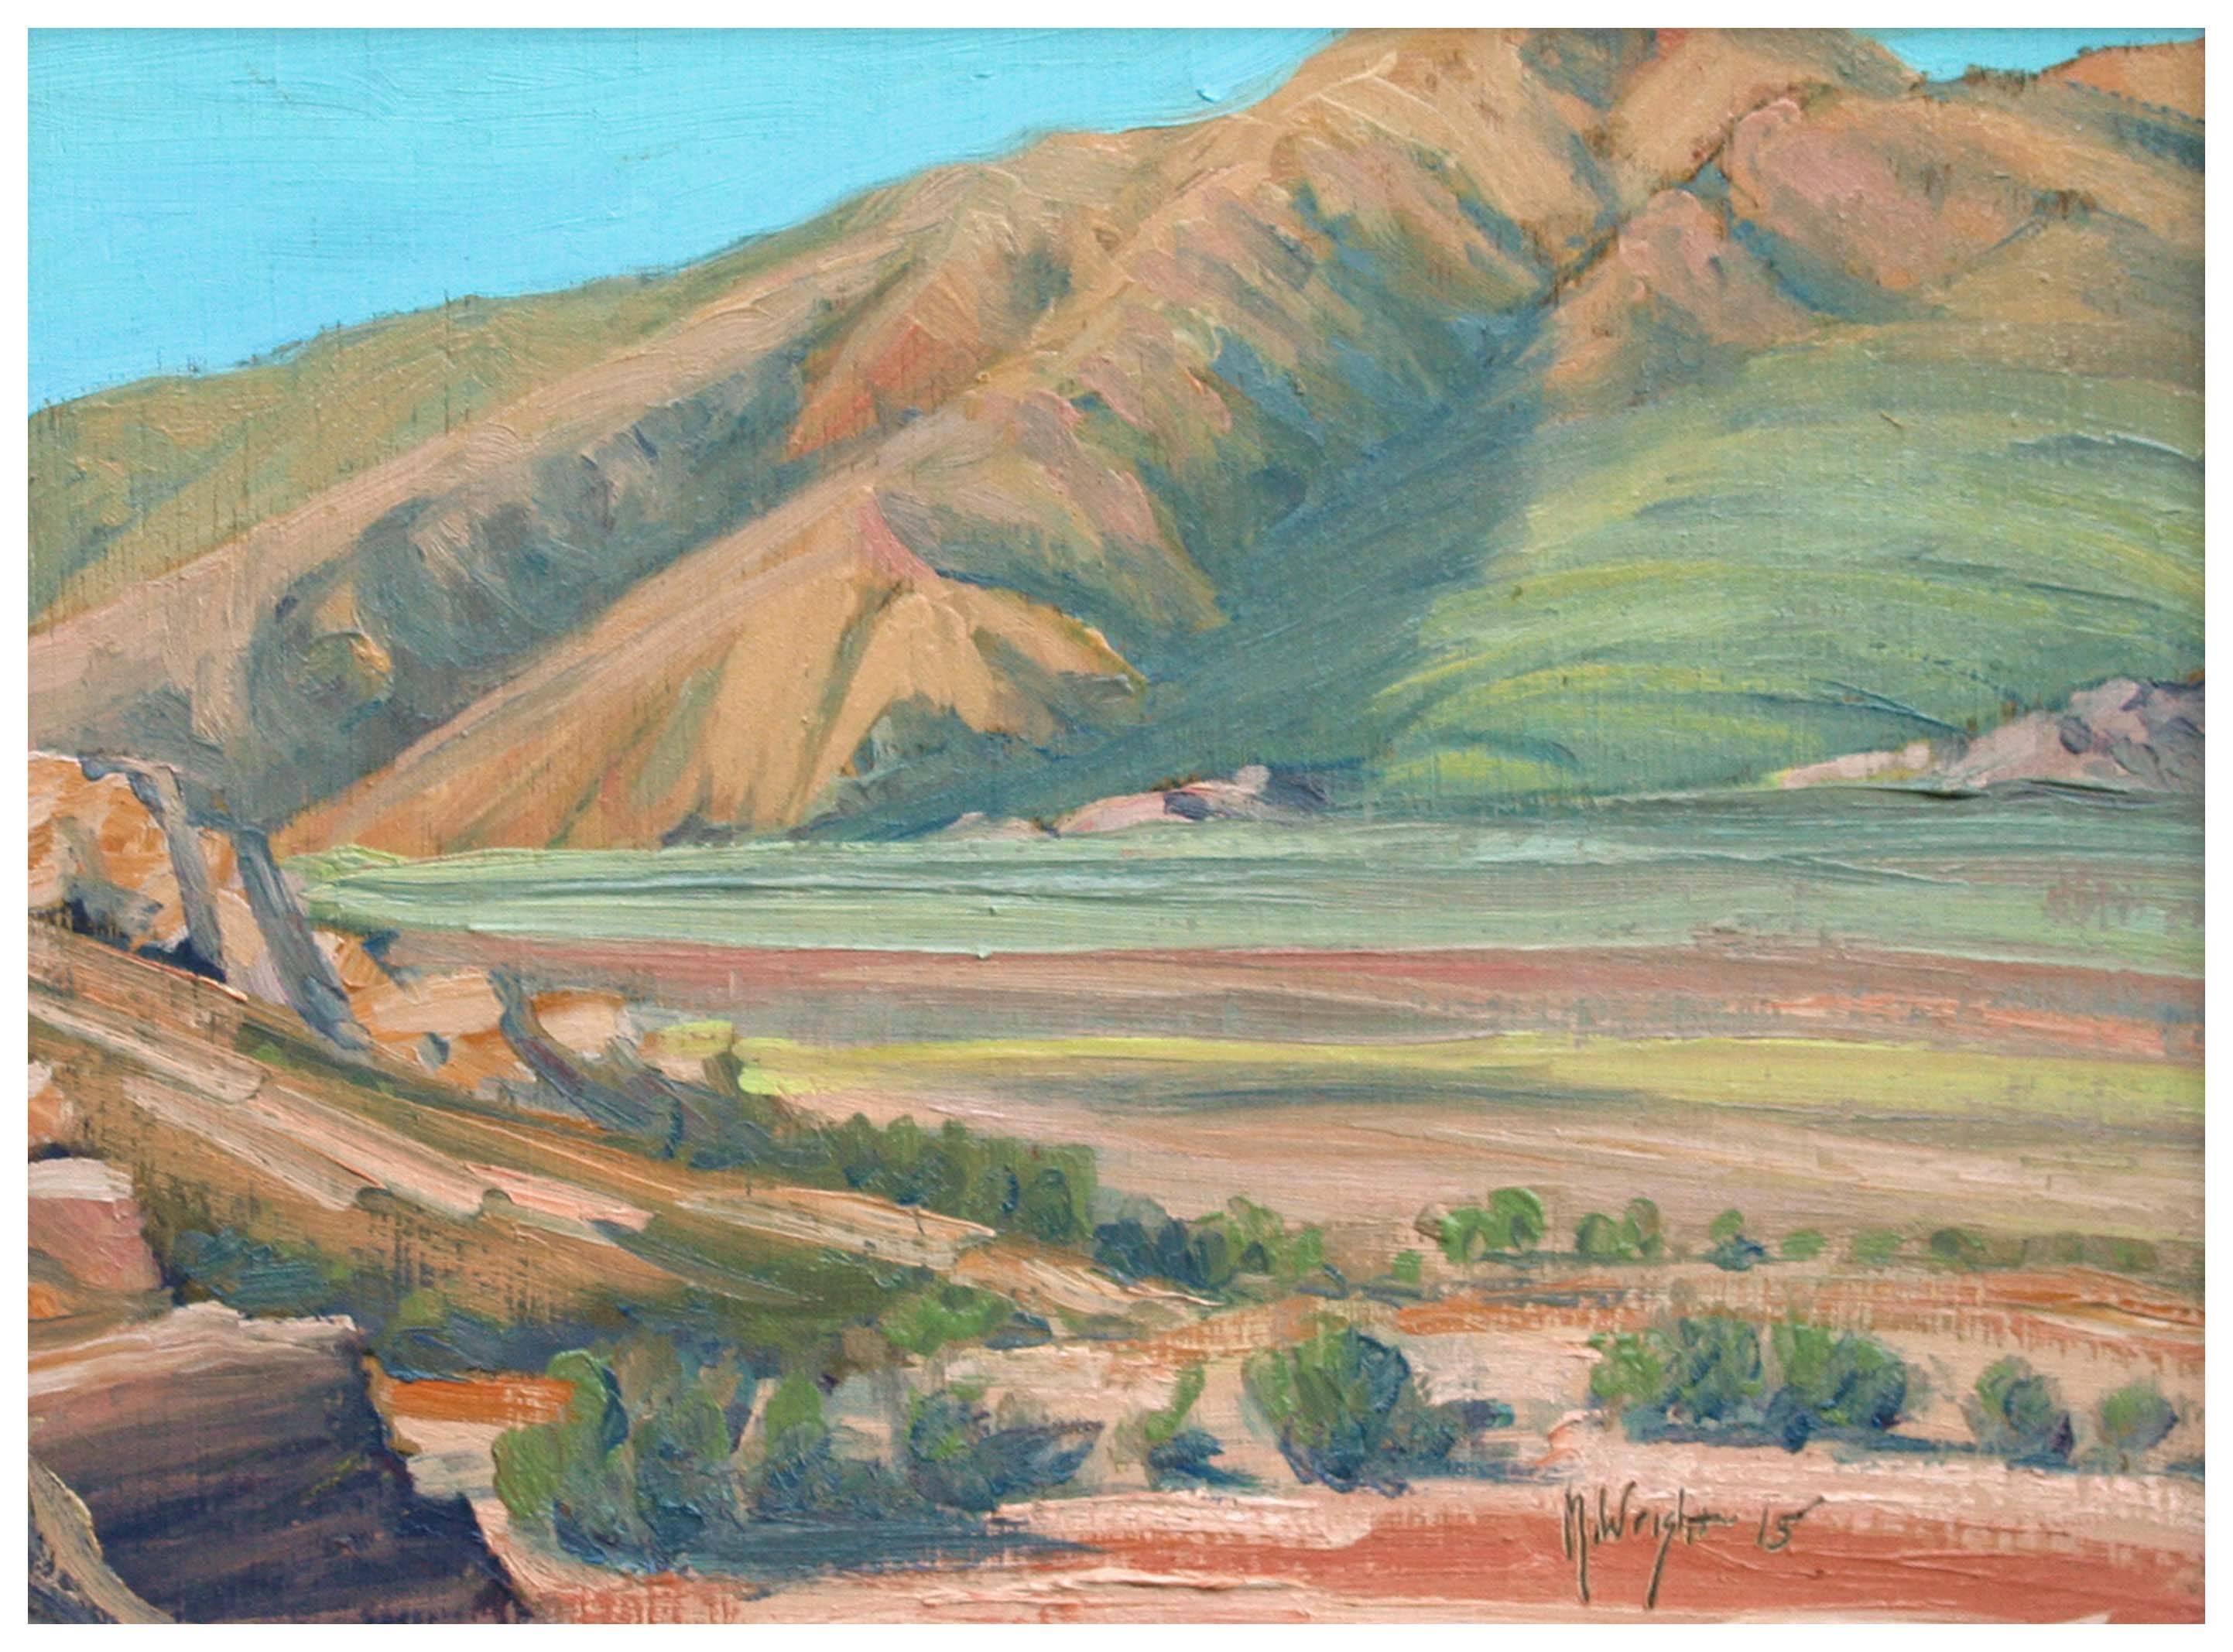 Desert and Hills Landscape  - Painting by Mike Wright